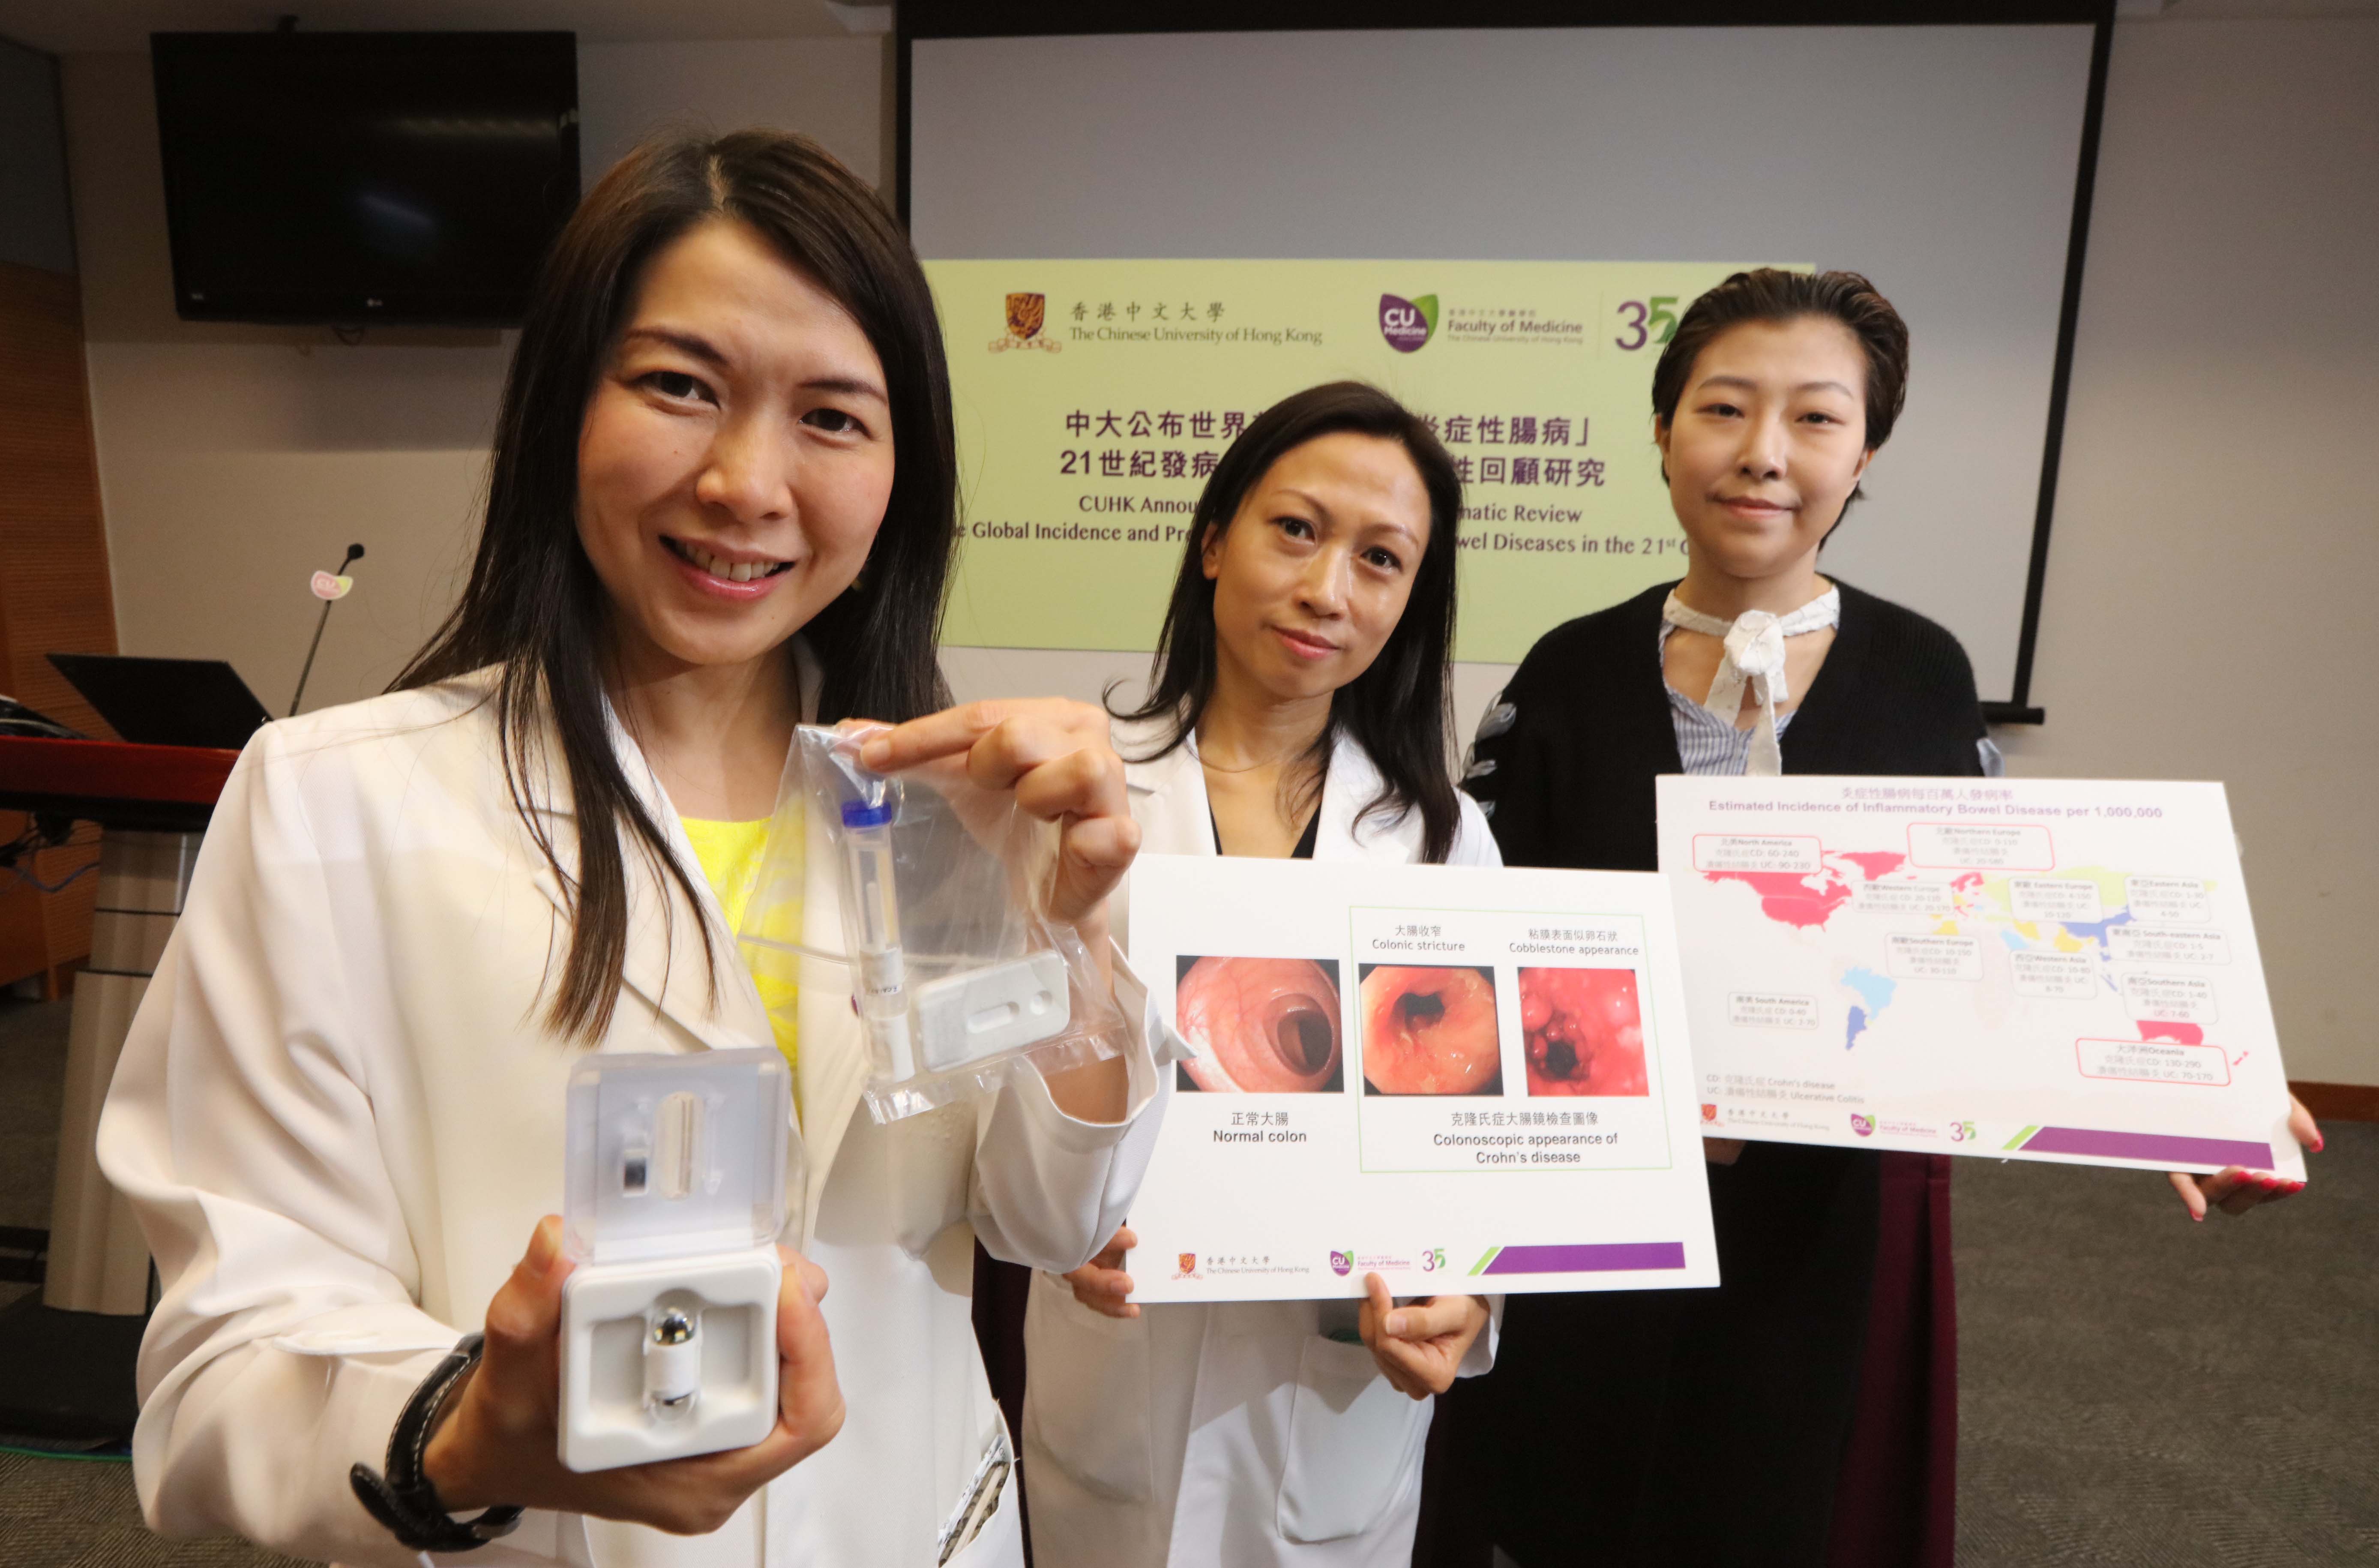 The Faculty of Medicine at CUHK announces the world’s first systematic review of the global incidence and prevalence of Inflammatory Bowel Diseases (IBD) in the 21st century and found the incidence in Hong Kong having risen about 30 times in the past 30 years. Study results have just been published in the leading medical journal The Lancet. (From left) Prof. Siew NG and Chief Nursing Officer Ms Jessica CHING from the Department of Medicine and Therapeutics, Faculty of Medicine at CUHK, and the IBD patient Miss SUM. 